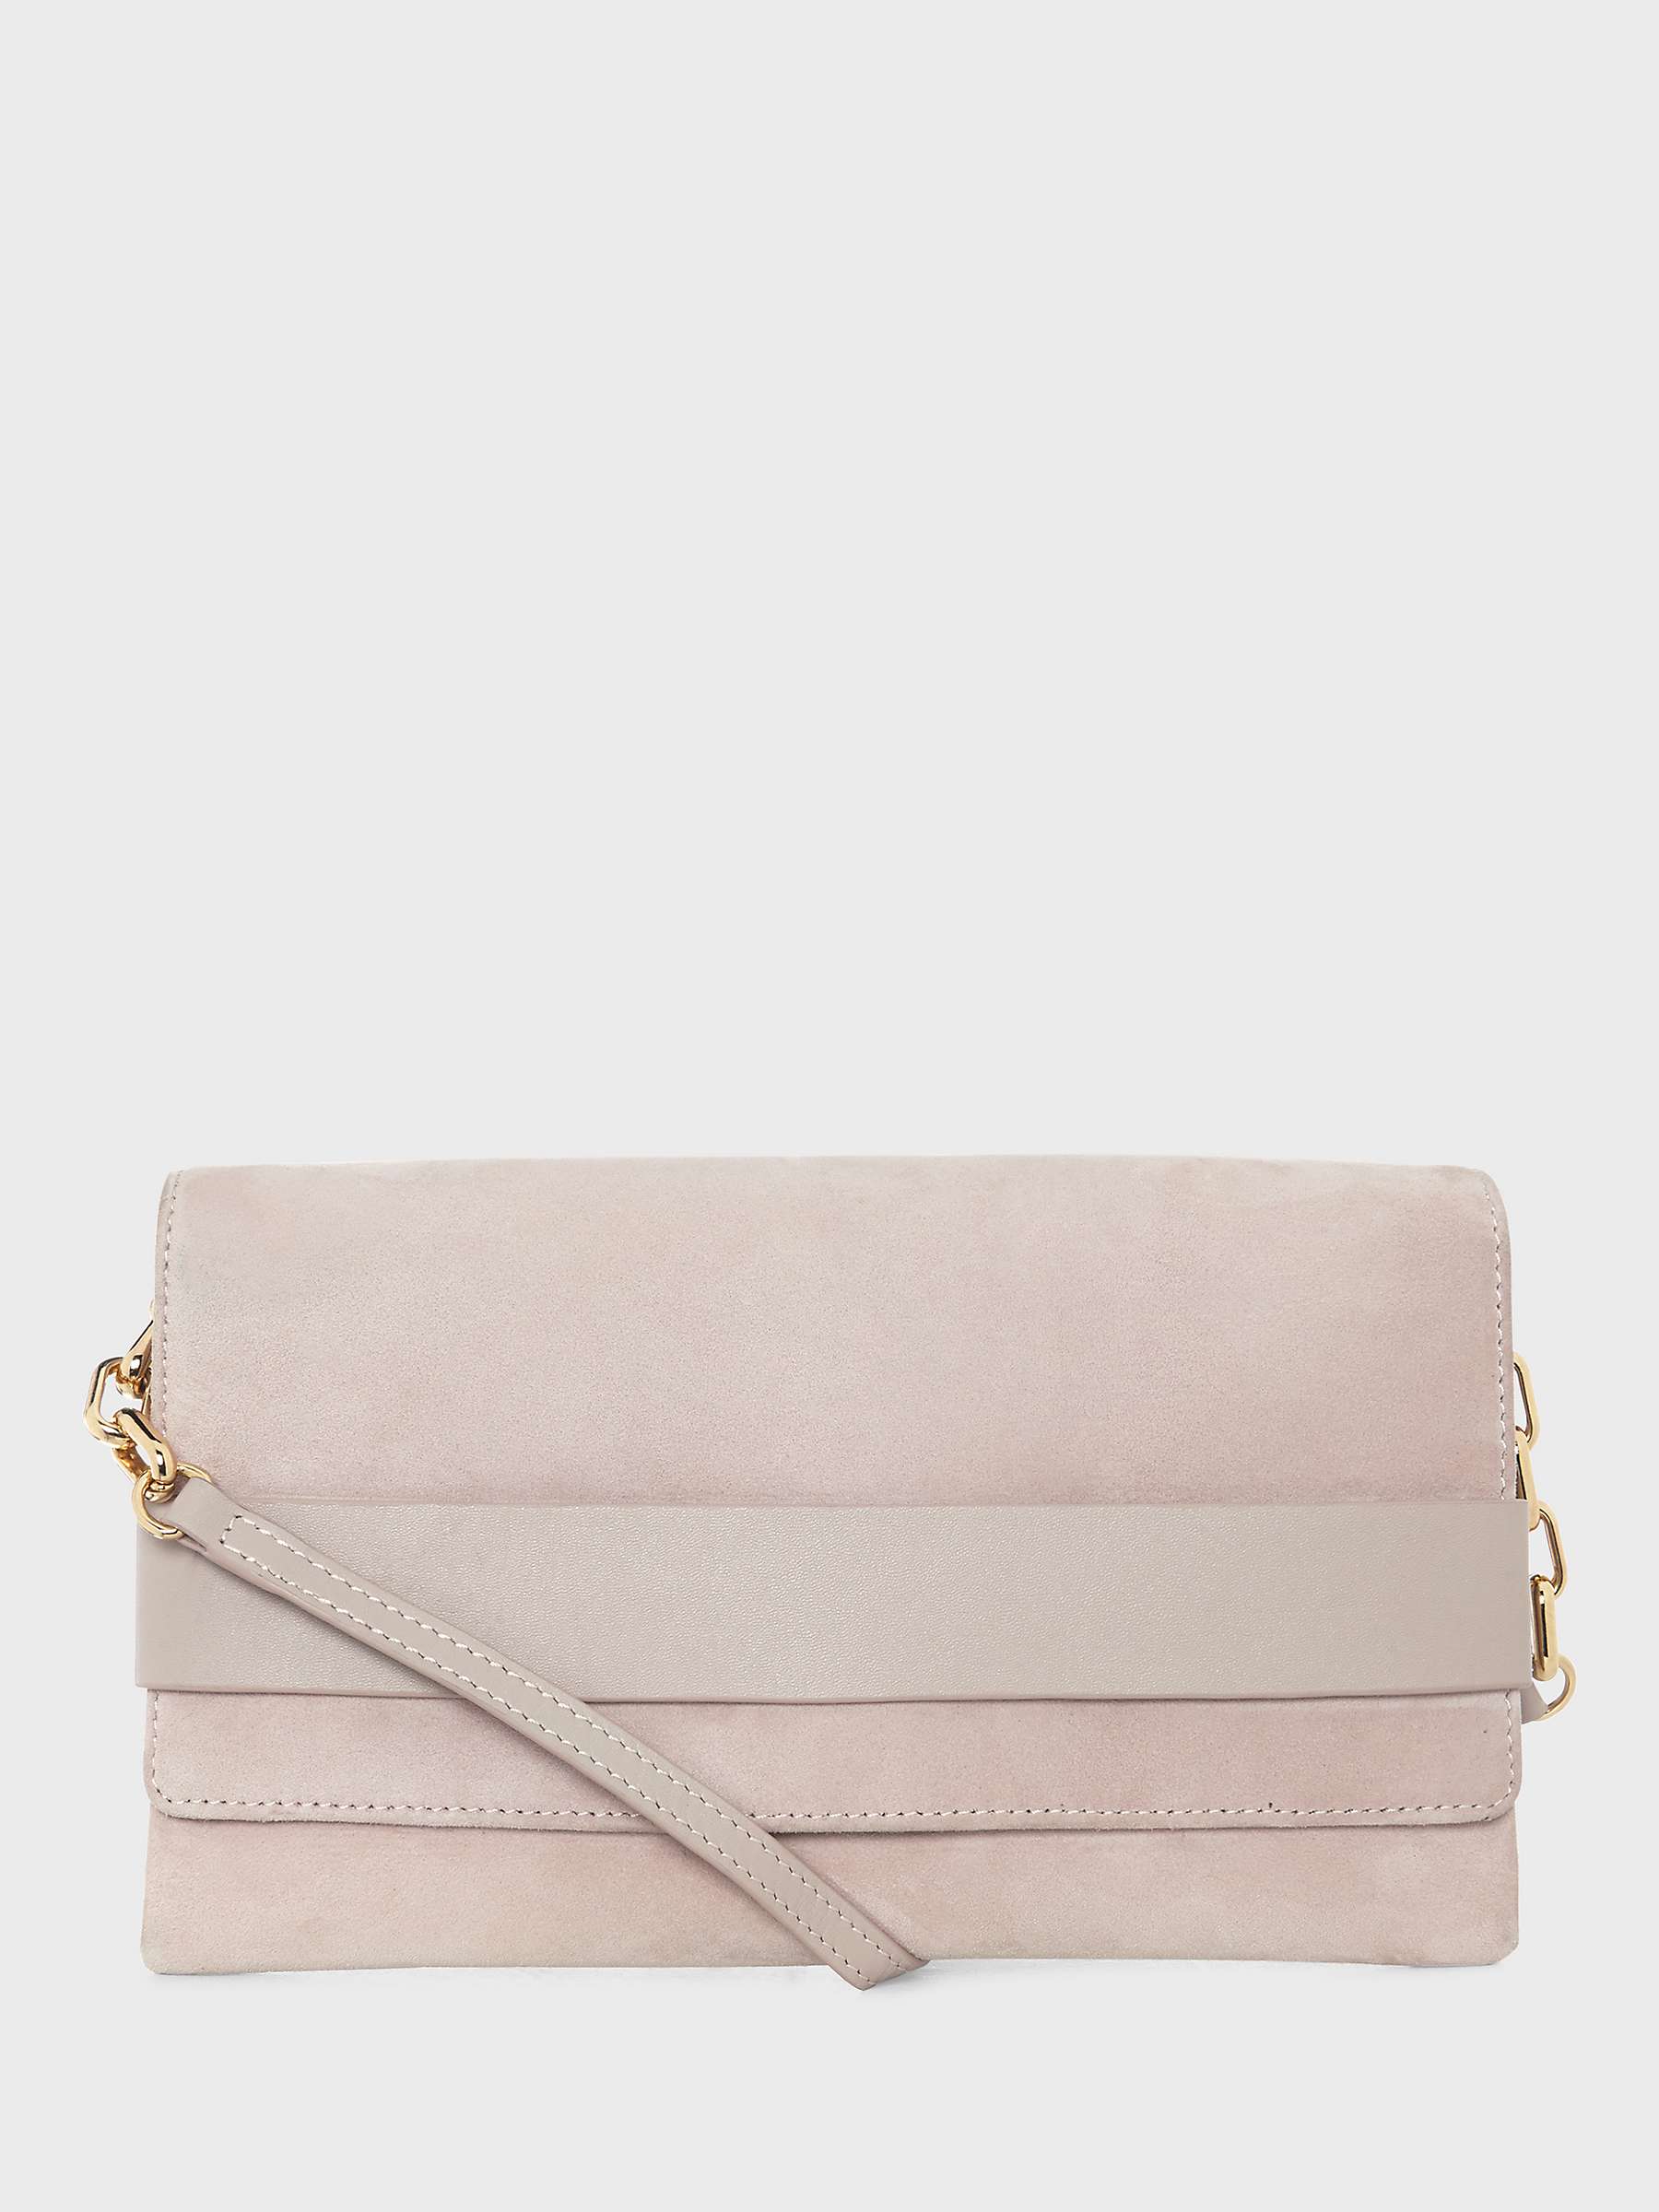 Buy Hobbs Honour Suede and Leather Clutch Bag Online at johnlewis.com